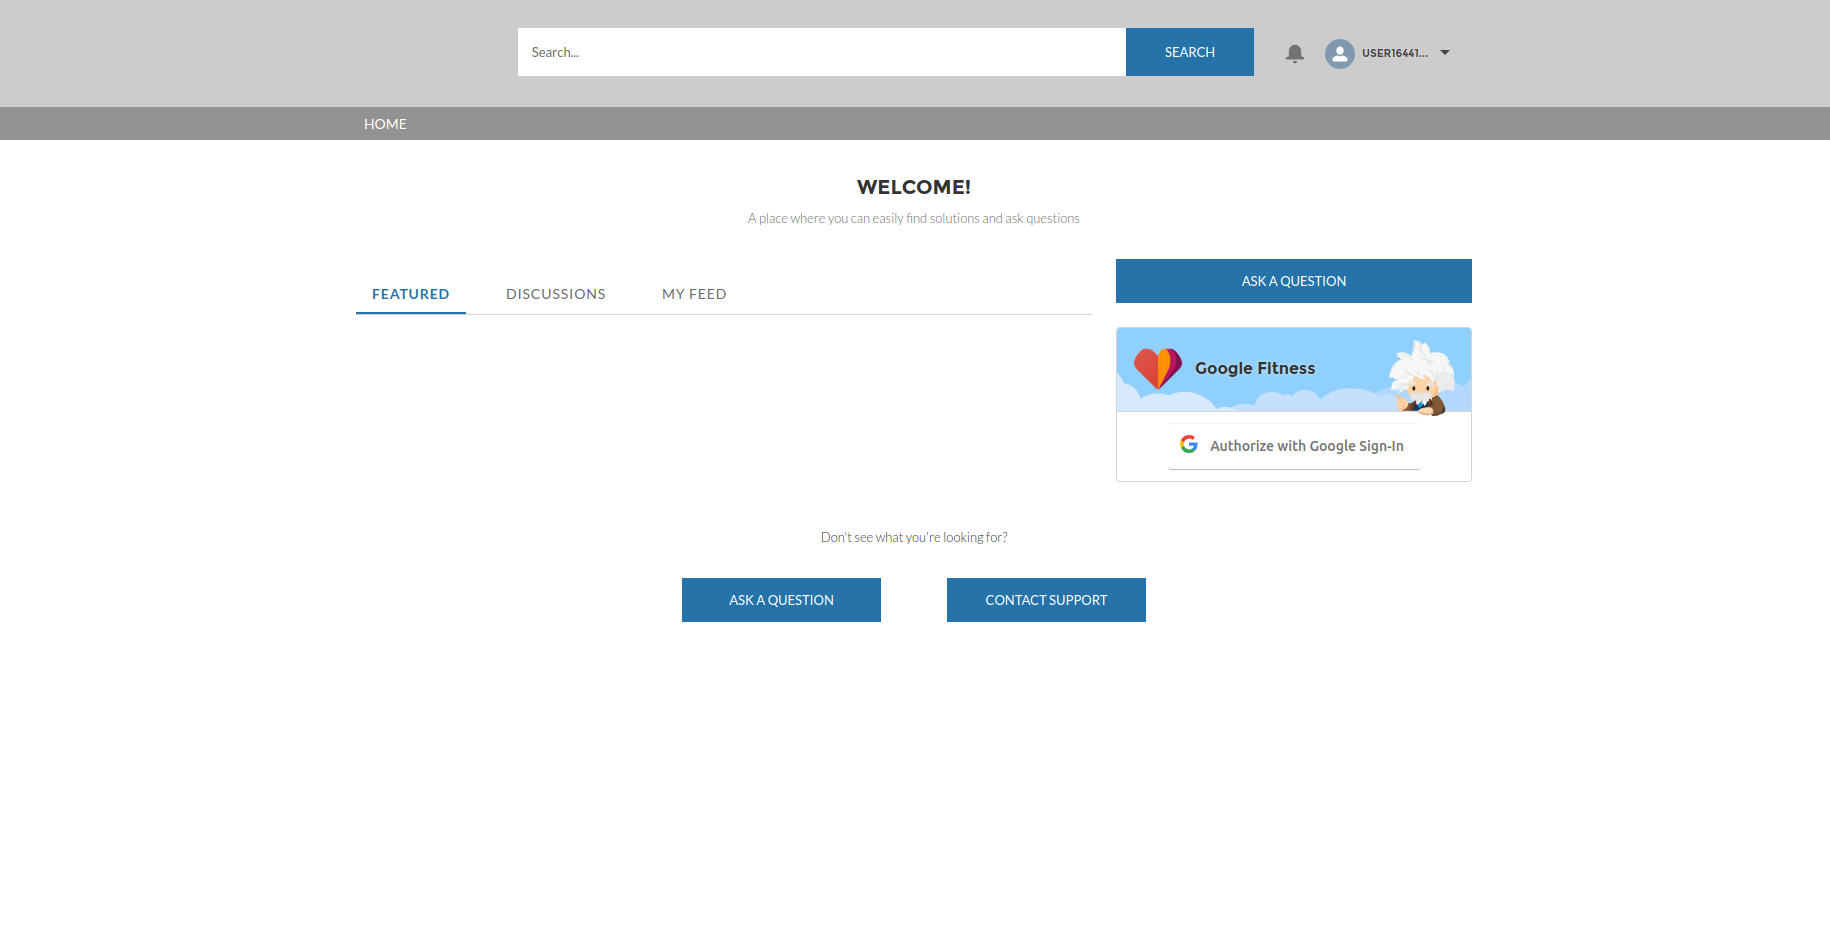 Dashboard view after Authentication To Authorize Their Google Fit Data